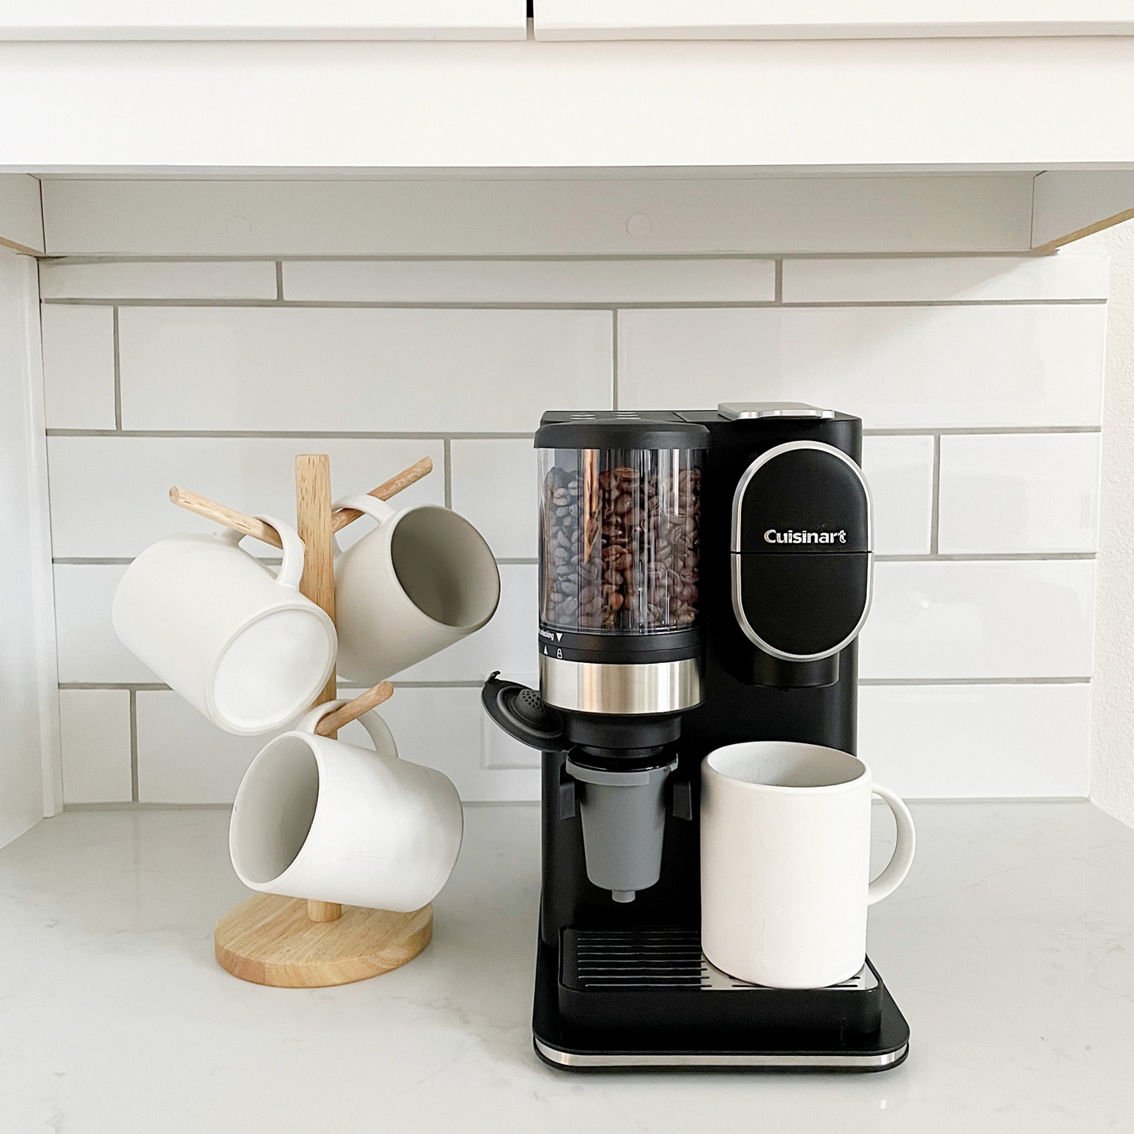 Cuisinart Grind and Brew Single Serve Coffeemaker - Image 9 of 9